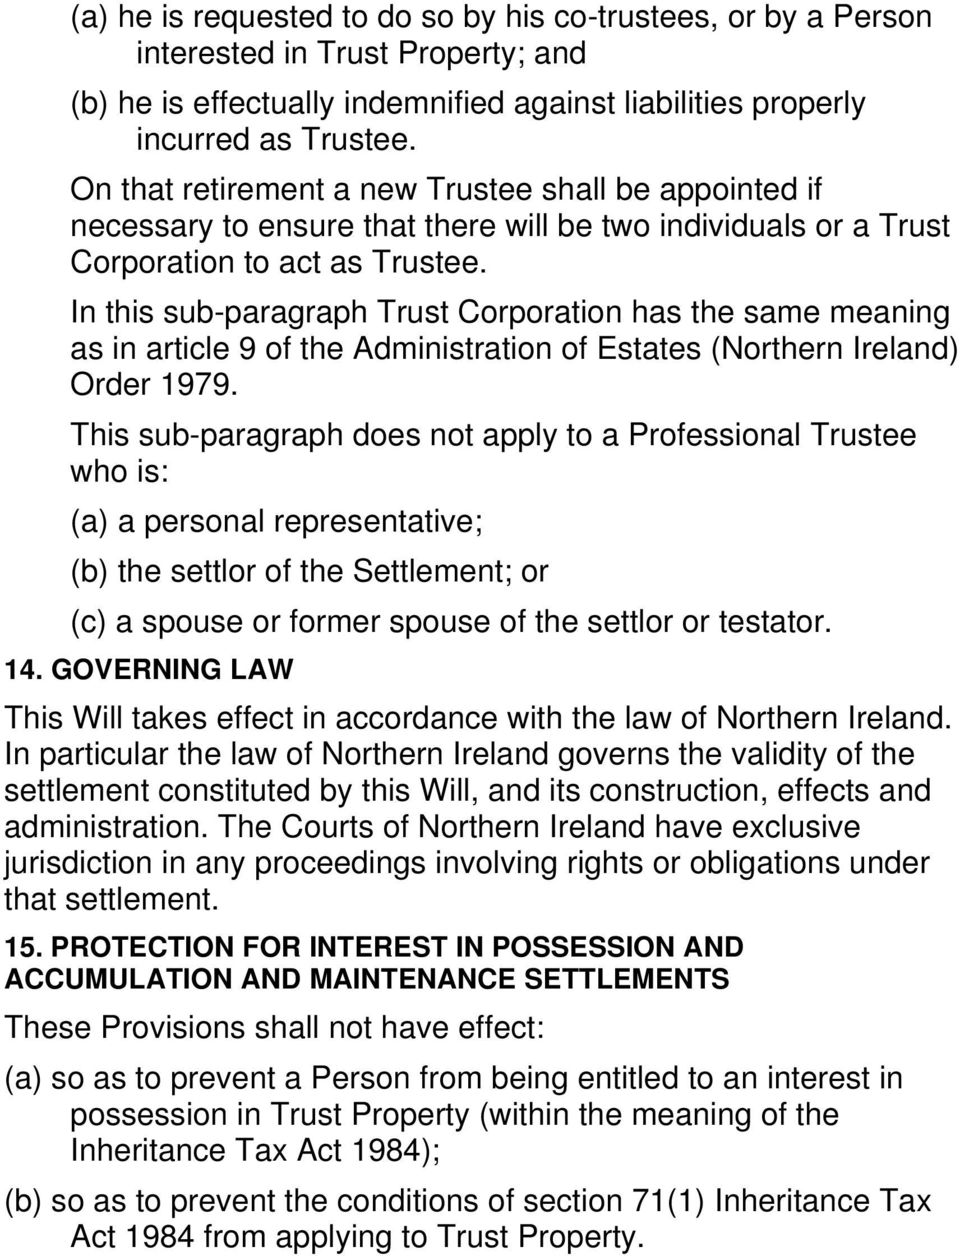 In this sub-paragraph Trust Corporation has the same meaning as in article 9 of the Administration of Estates (Northern Ireland) Order 1979.